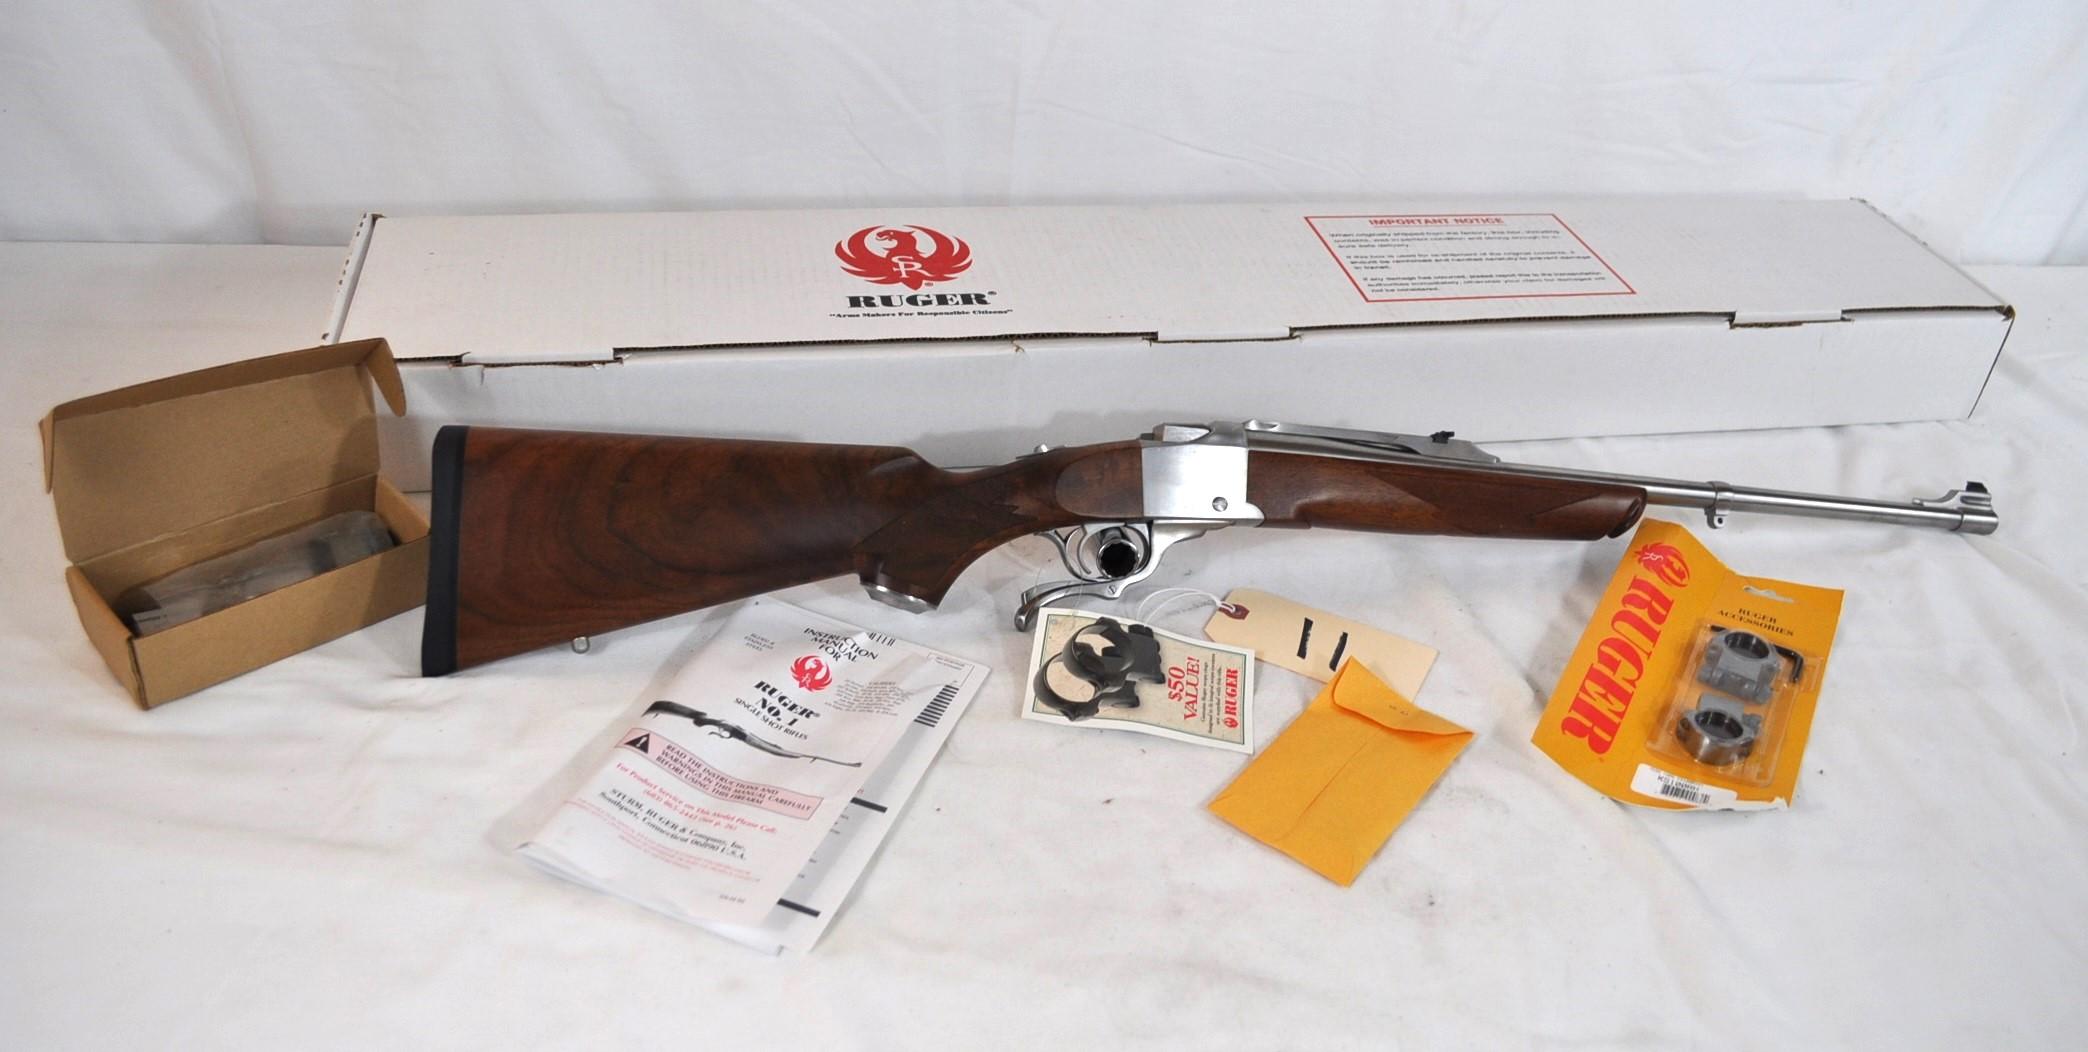 Ruger No.1 K1A .257 Roberts - Looks NIB - Stainless -Model 11316 - Ser # 134-11867